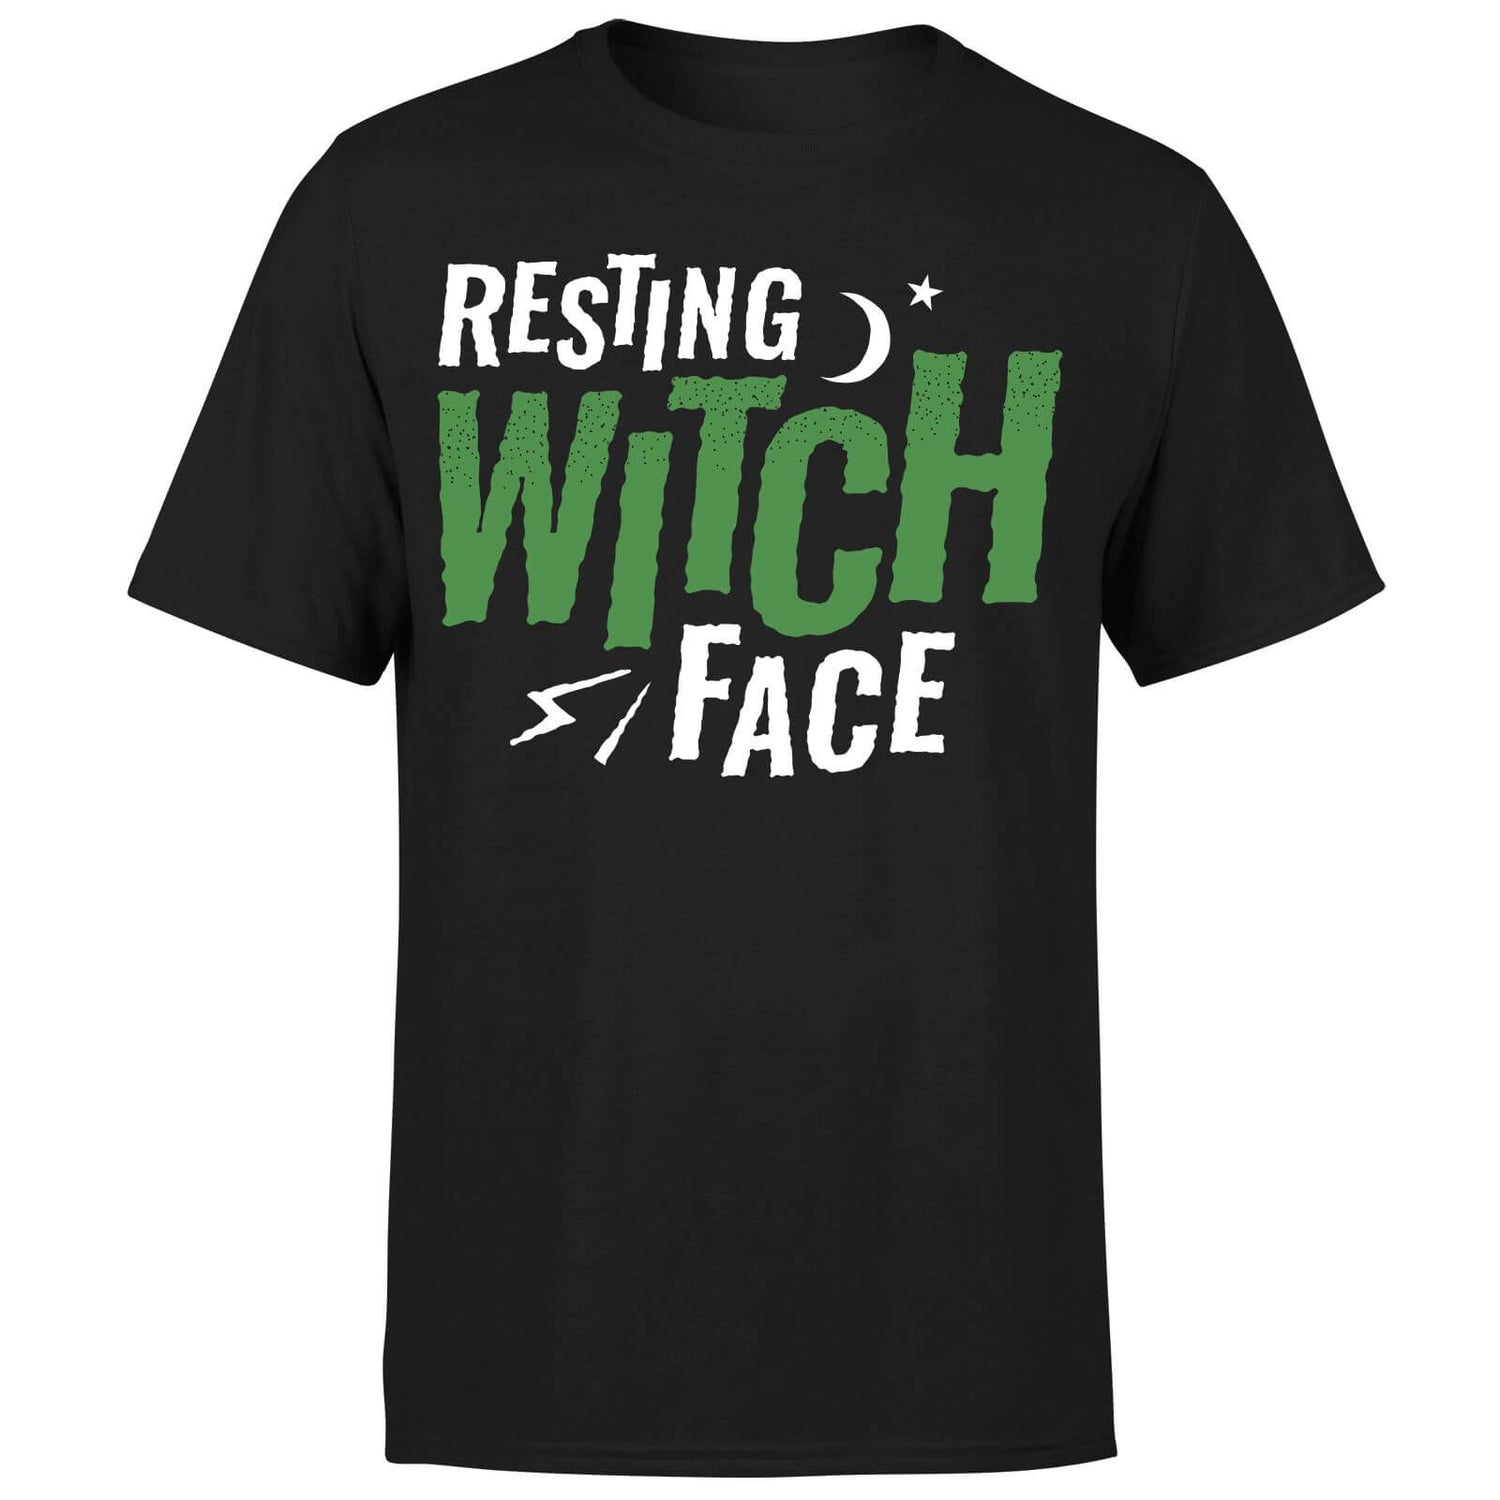 Resting Witch Face T-Shirt - Black